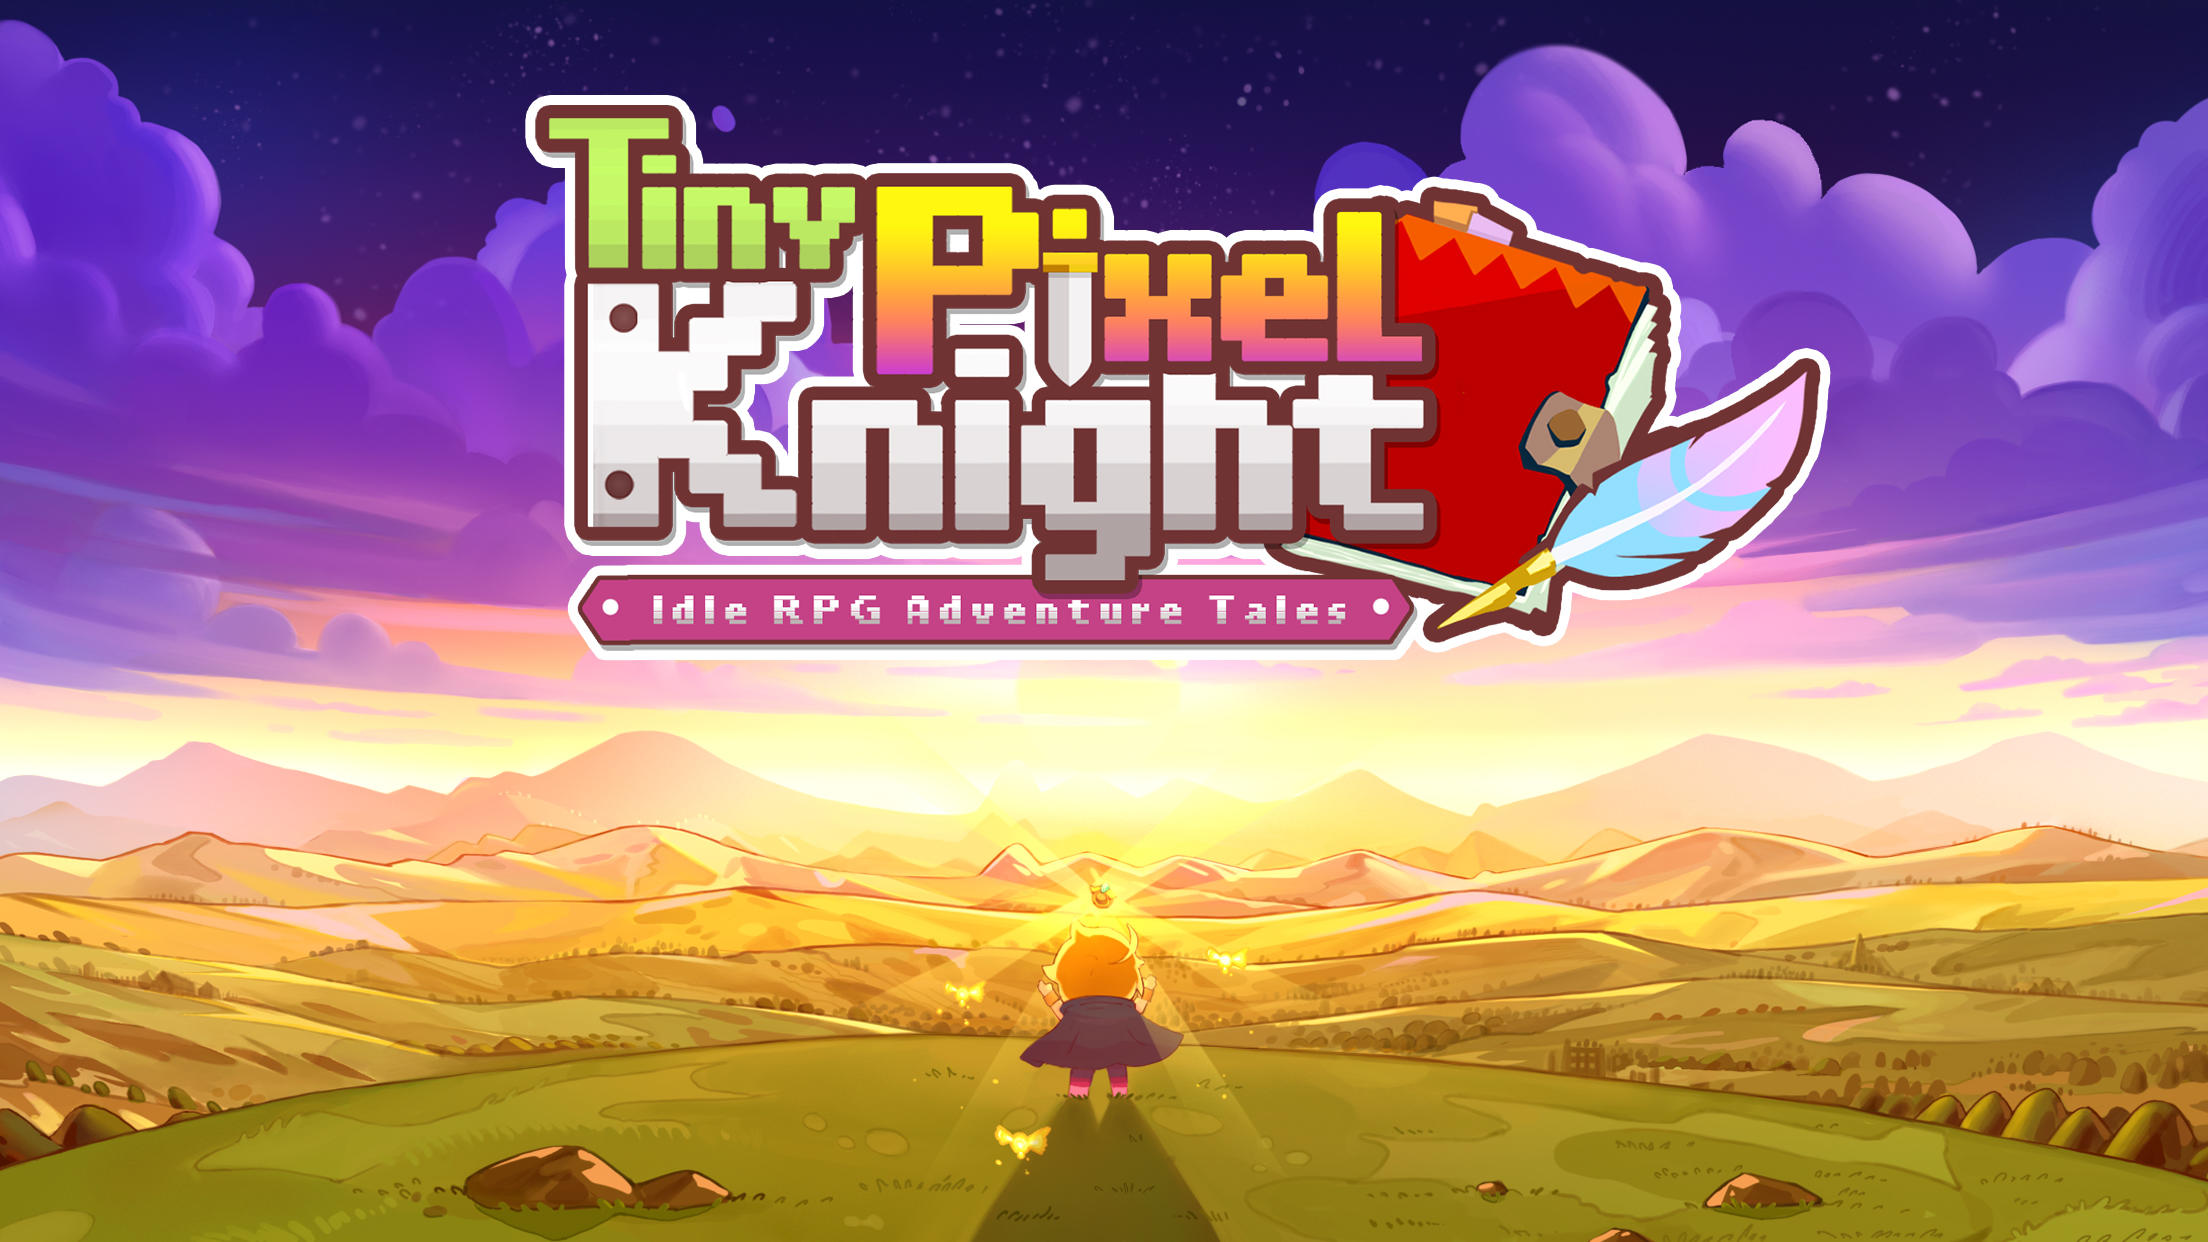 Screenshot 1 of Tiny Pixel Knight - Contes d'aventure RPG inactifs 1.1.5